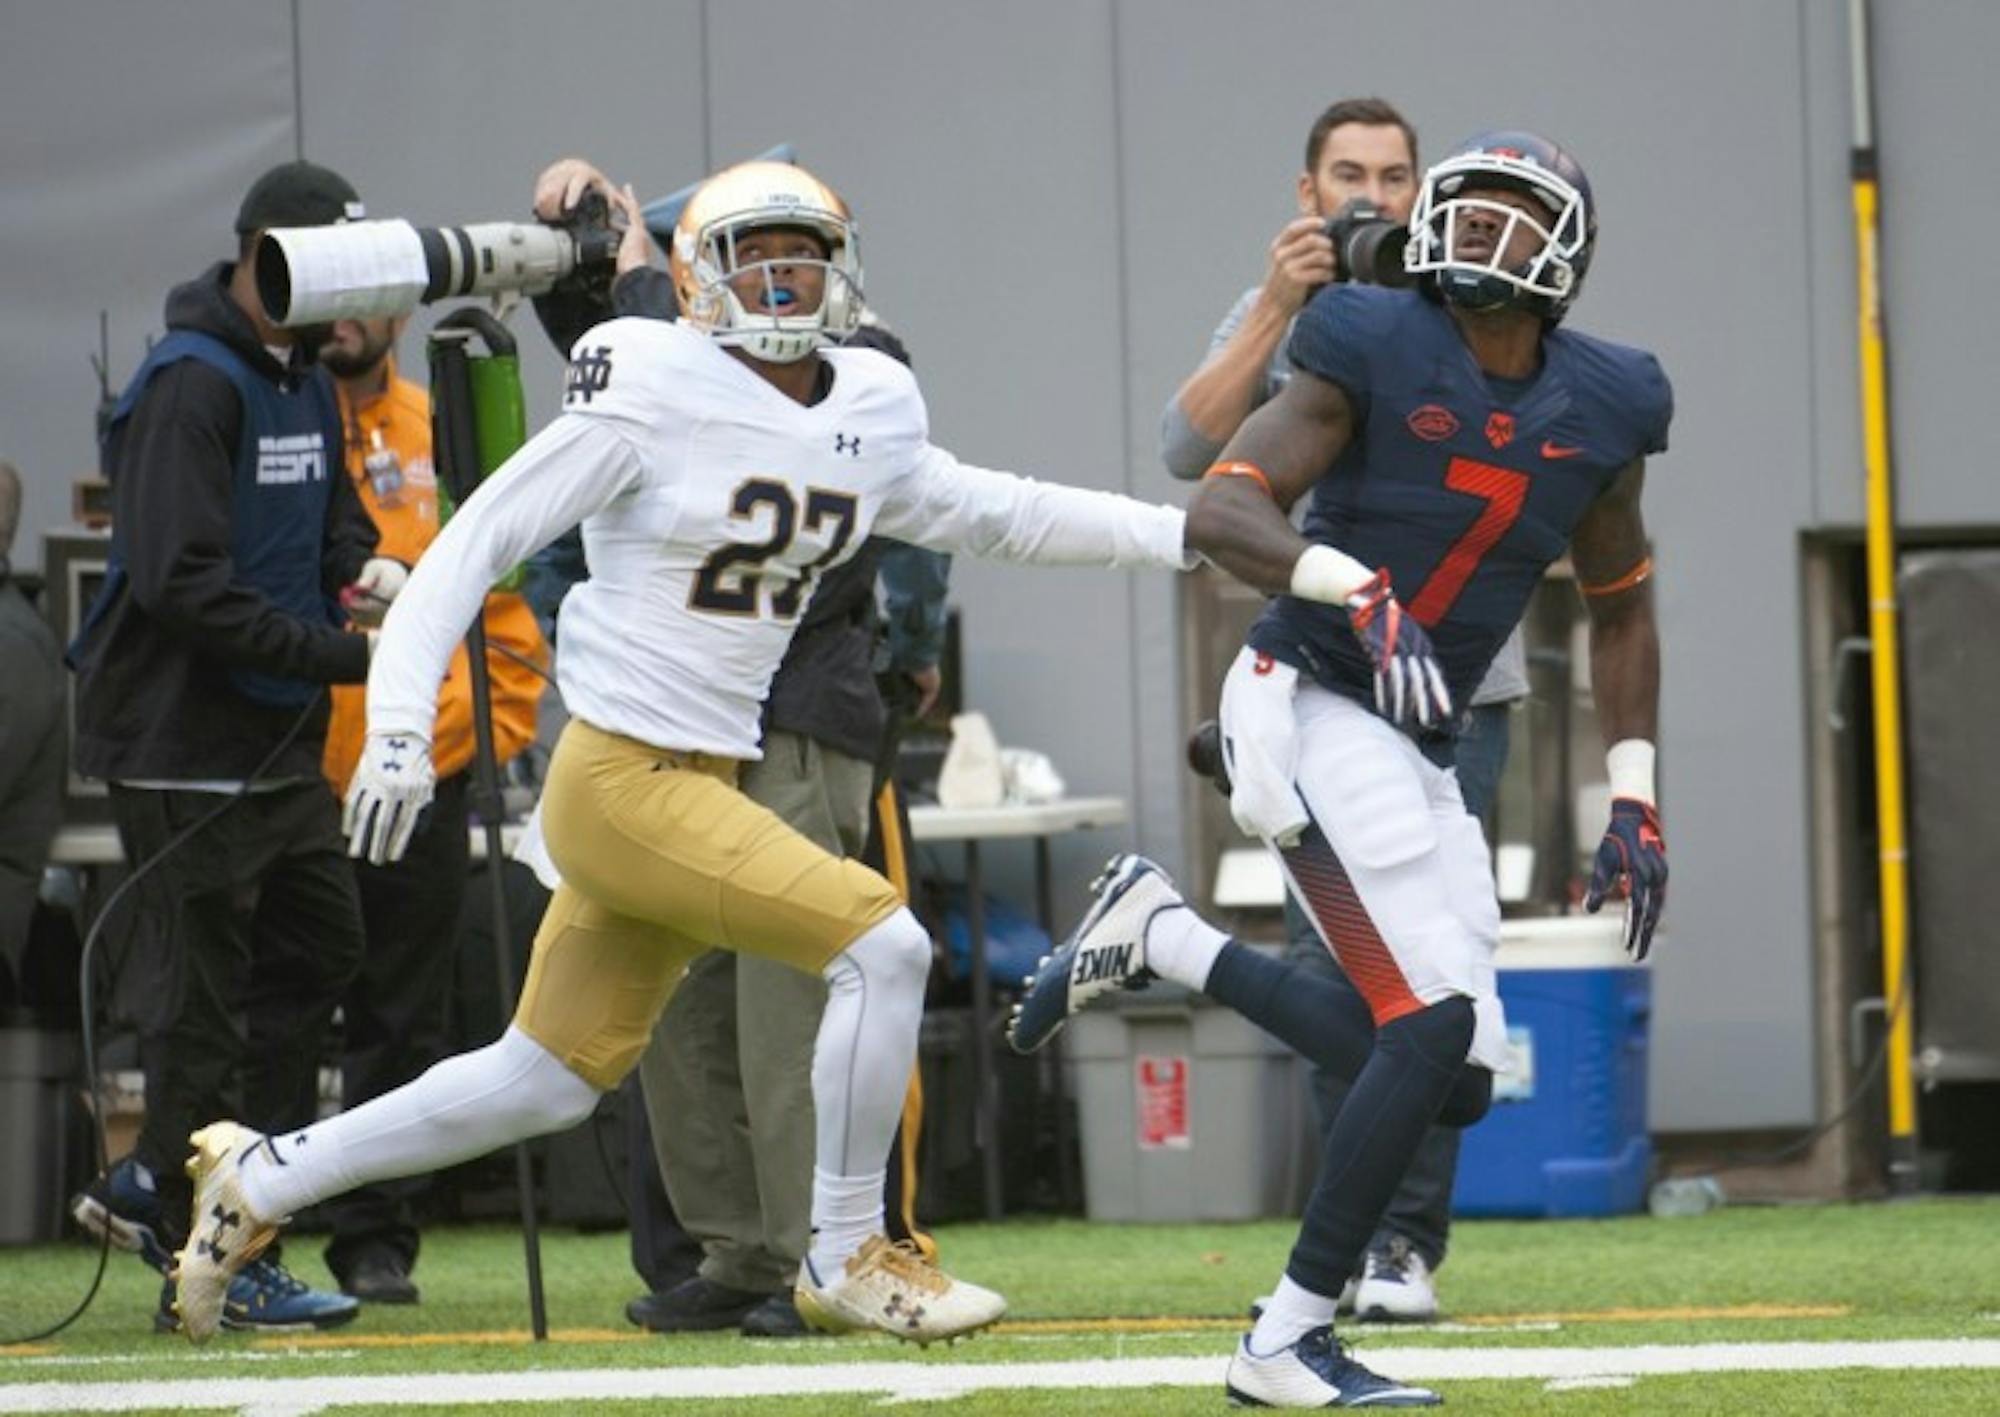 Irish freshman defensive back Julian Love tracks the incoming pass during Notre Dame’s 50-33 victory over Syracuse on Saturday at MetLife Stadium.